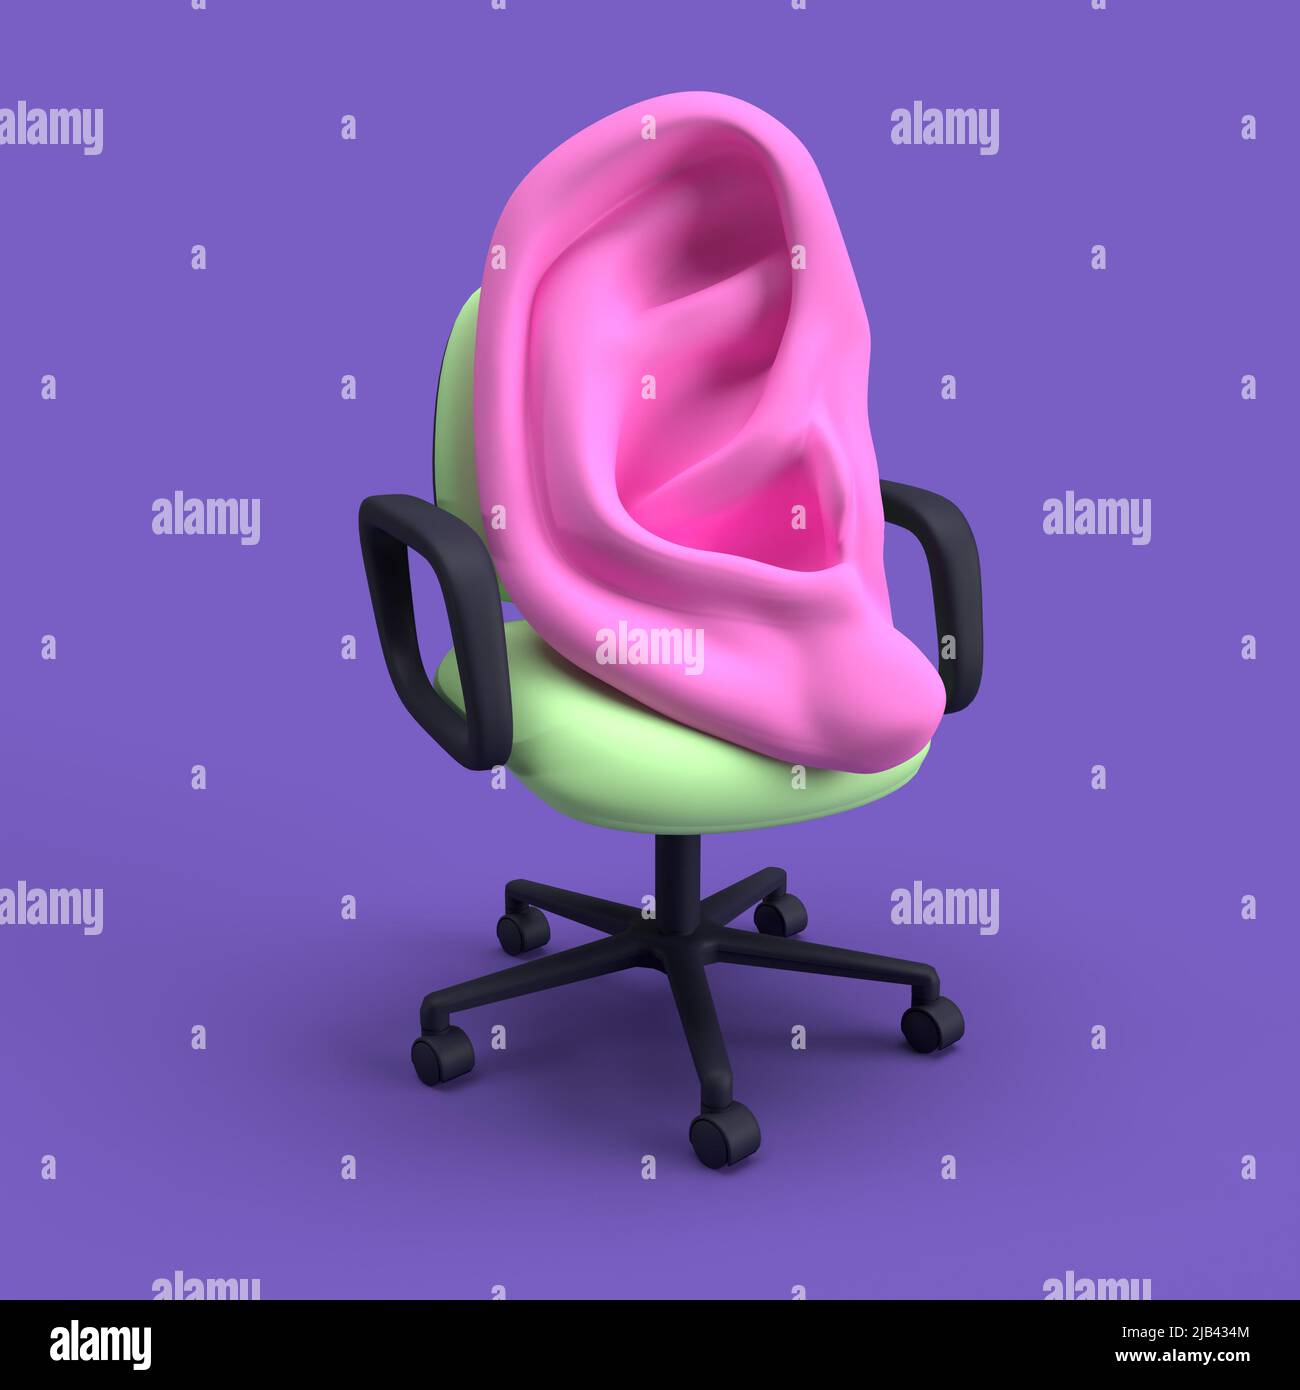 a big ear sitting in a office chair and listening, 3d illustration of psychoanalysis practice Stock Photo